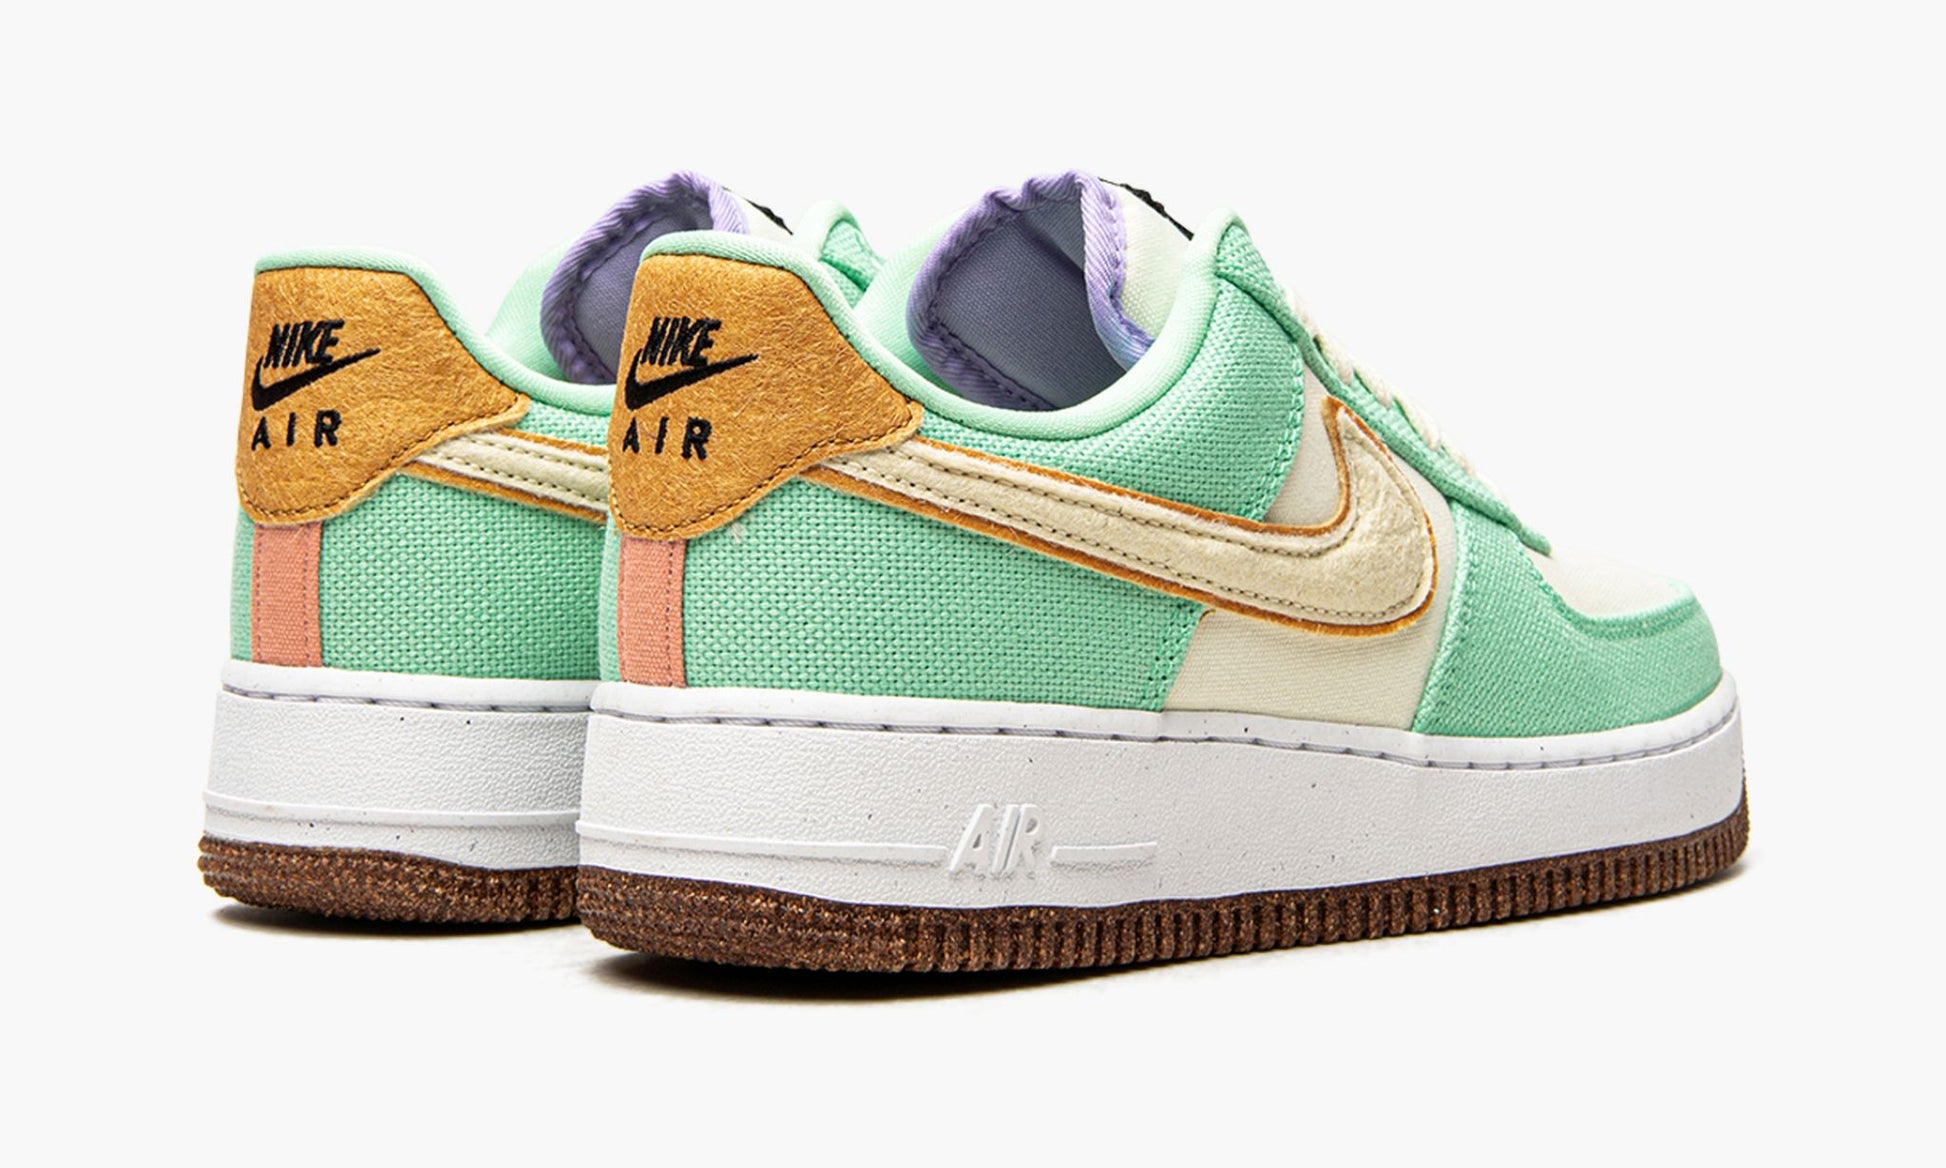 WMNS Air Force 1 Low "Happy Pineapple"